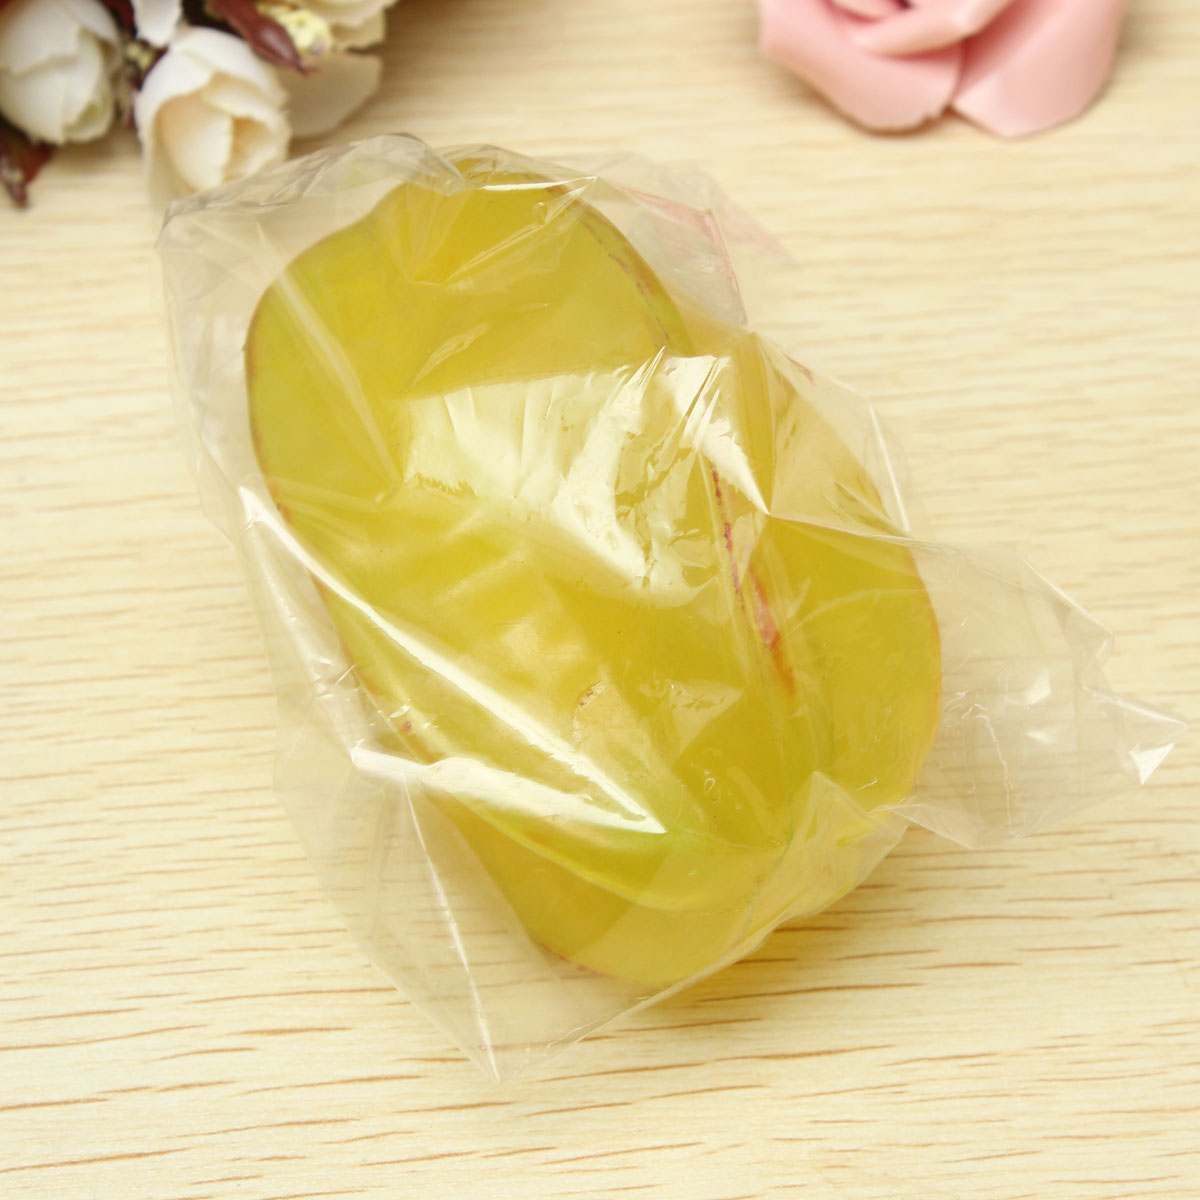 100Pcs-11x15cm-Transparent-Clear-Shrink-Wrap-Films-Package-Heat-Seal-Gift-Packaging-Bags-1162831